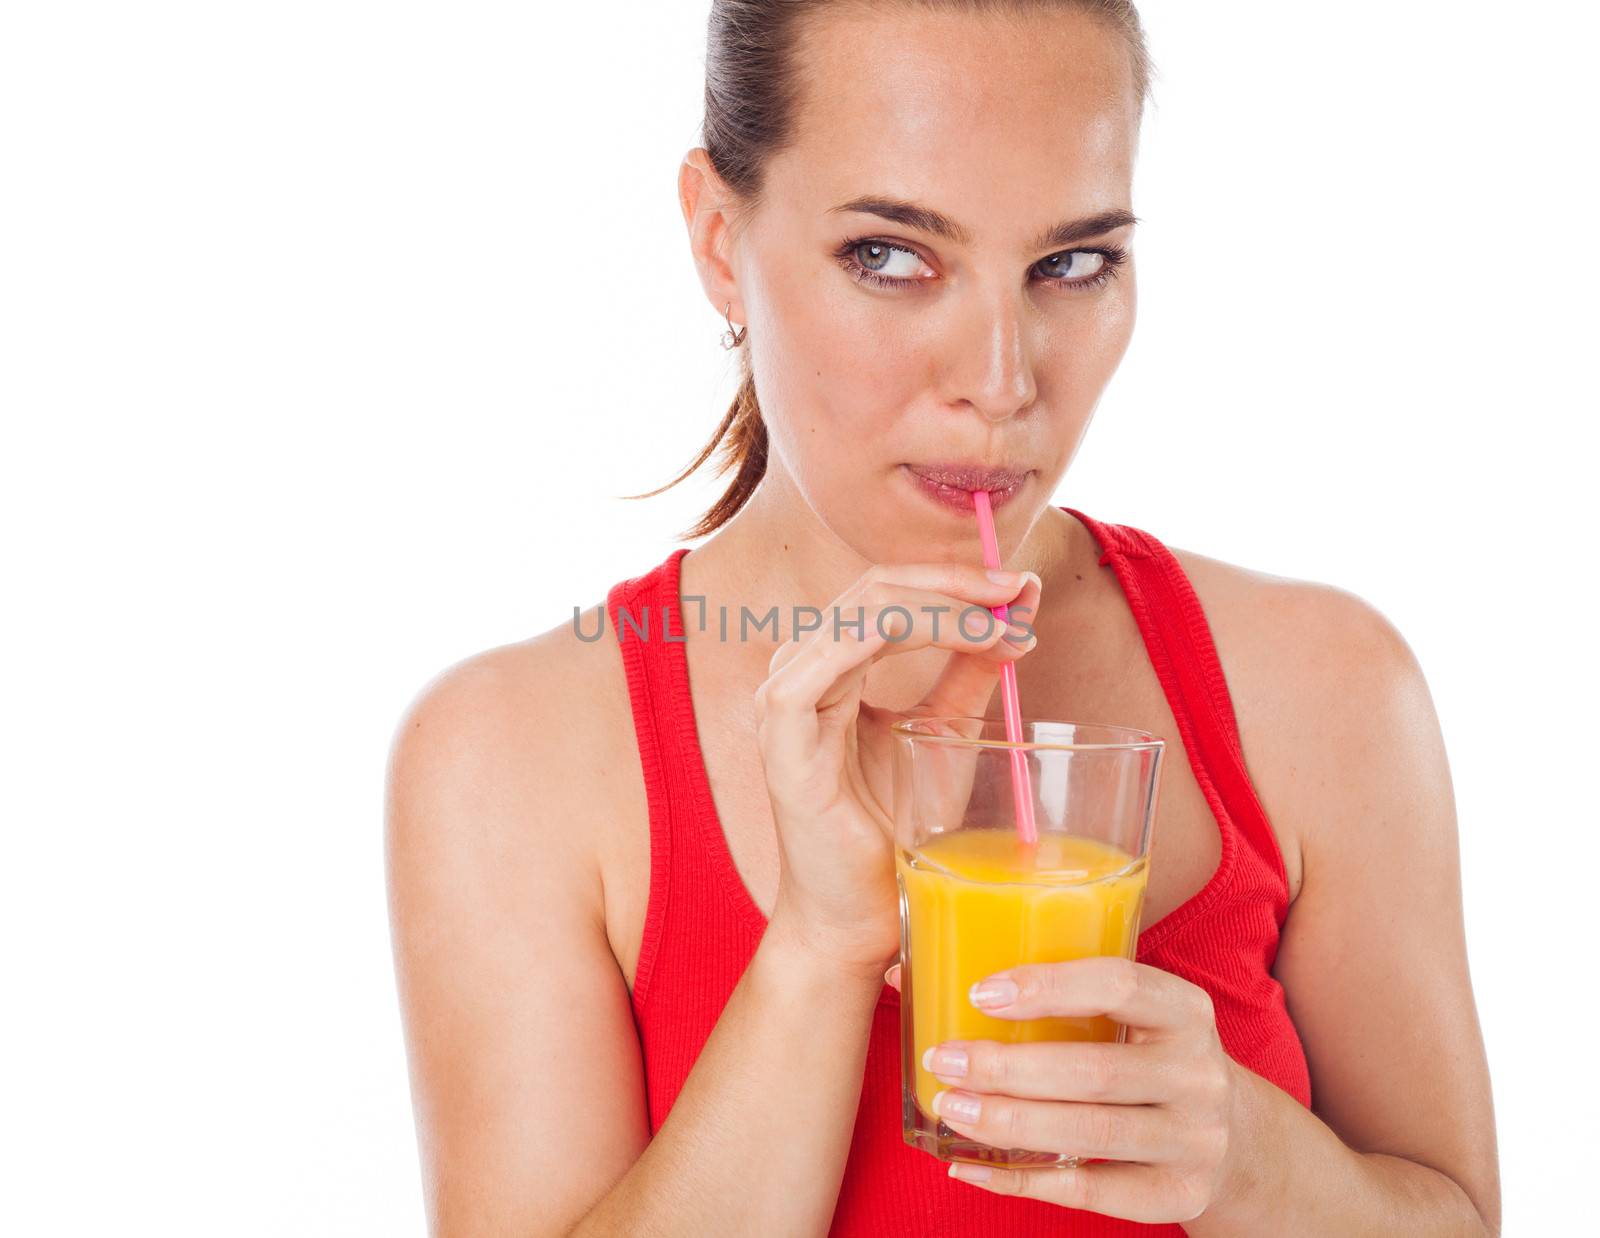 Portrait of a woman drinking an orange juice with a straw and looking something, isolated on white